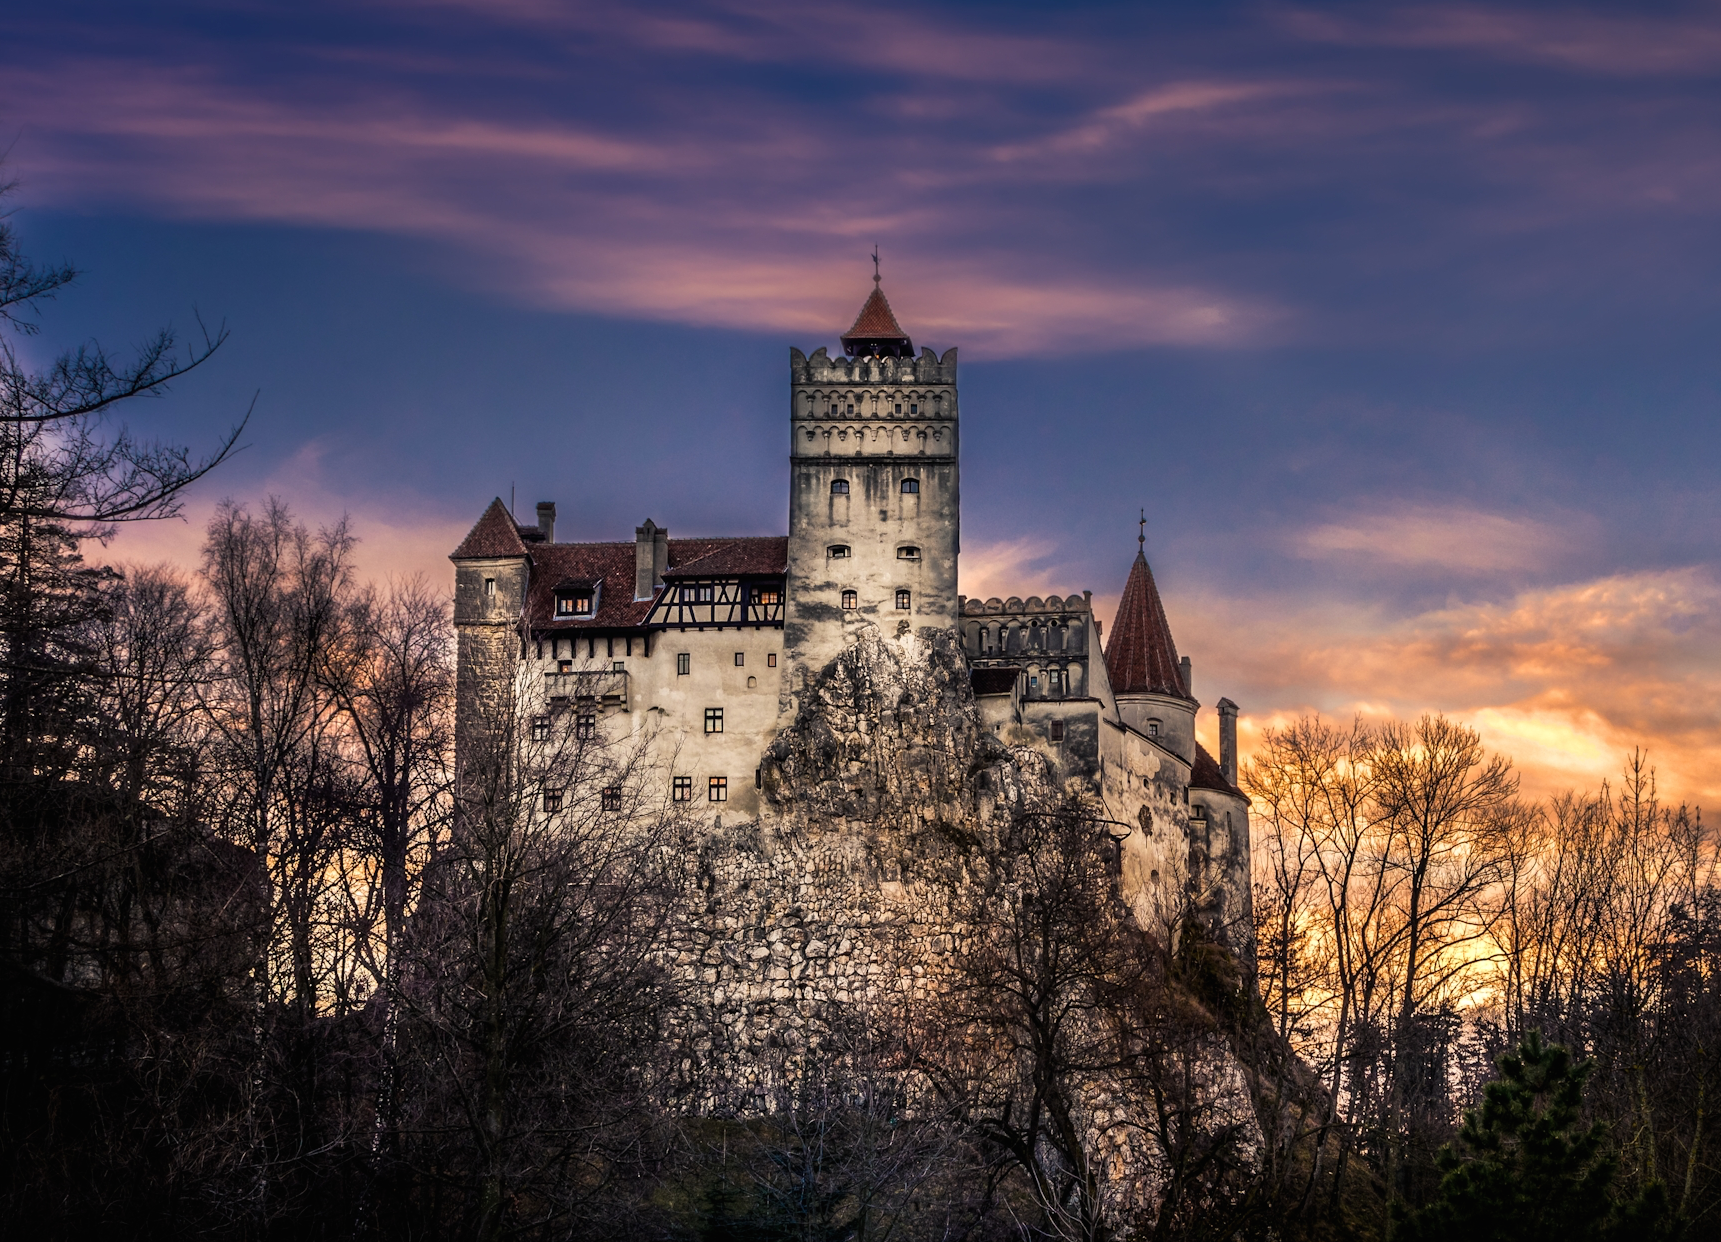 Searching the new blood: Dracula's castle is for sale